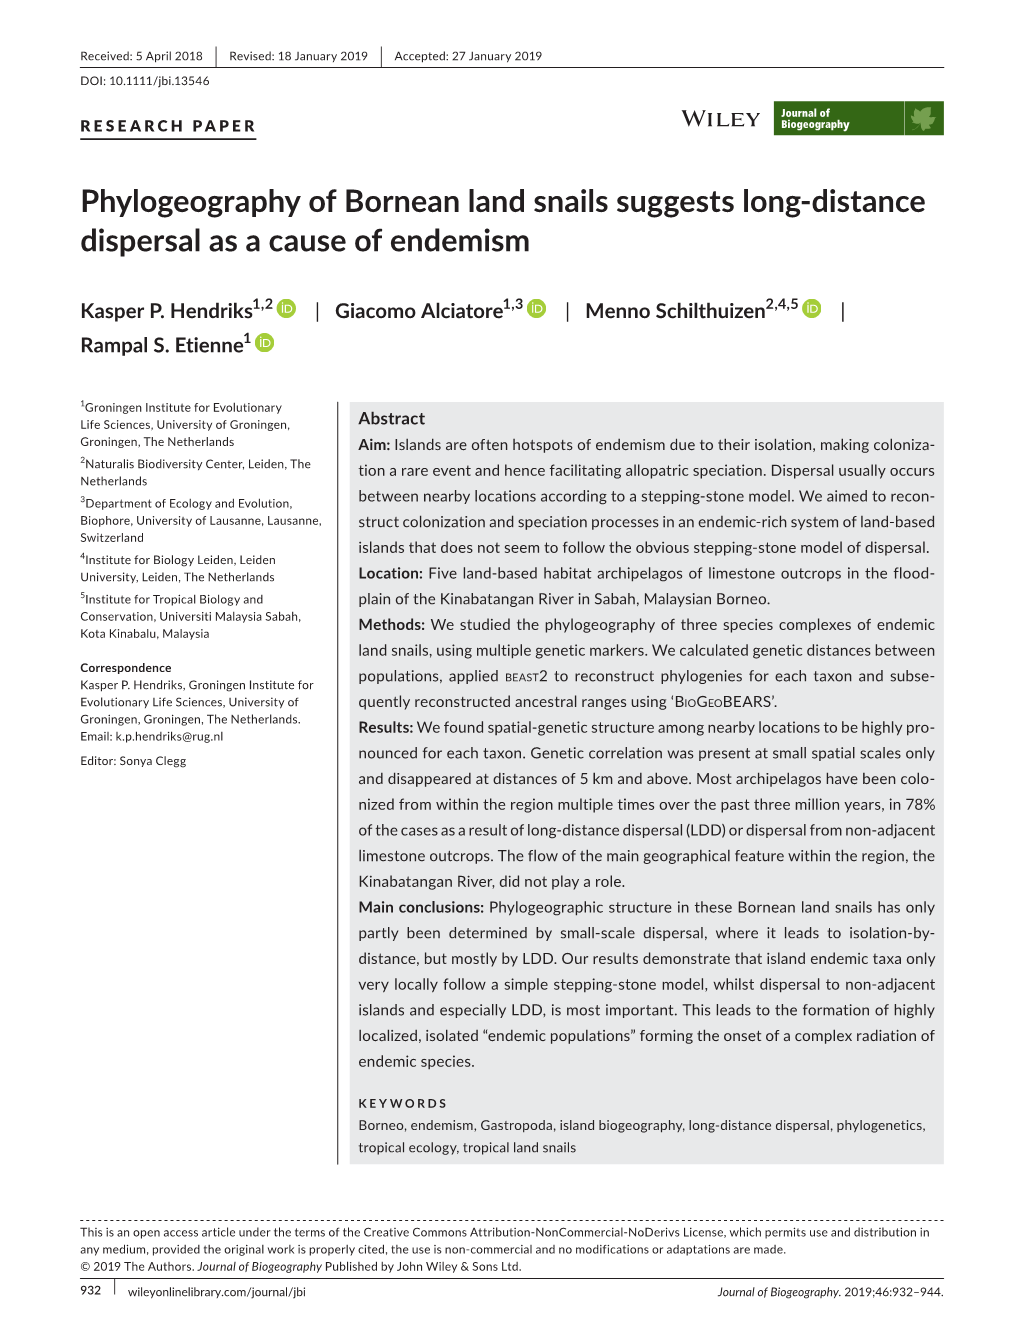 Phylogeography of Bornean Land Snails Suggests Long‐Distance